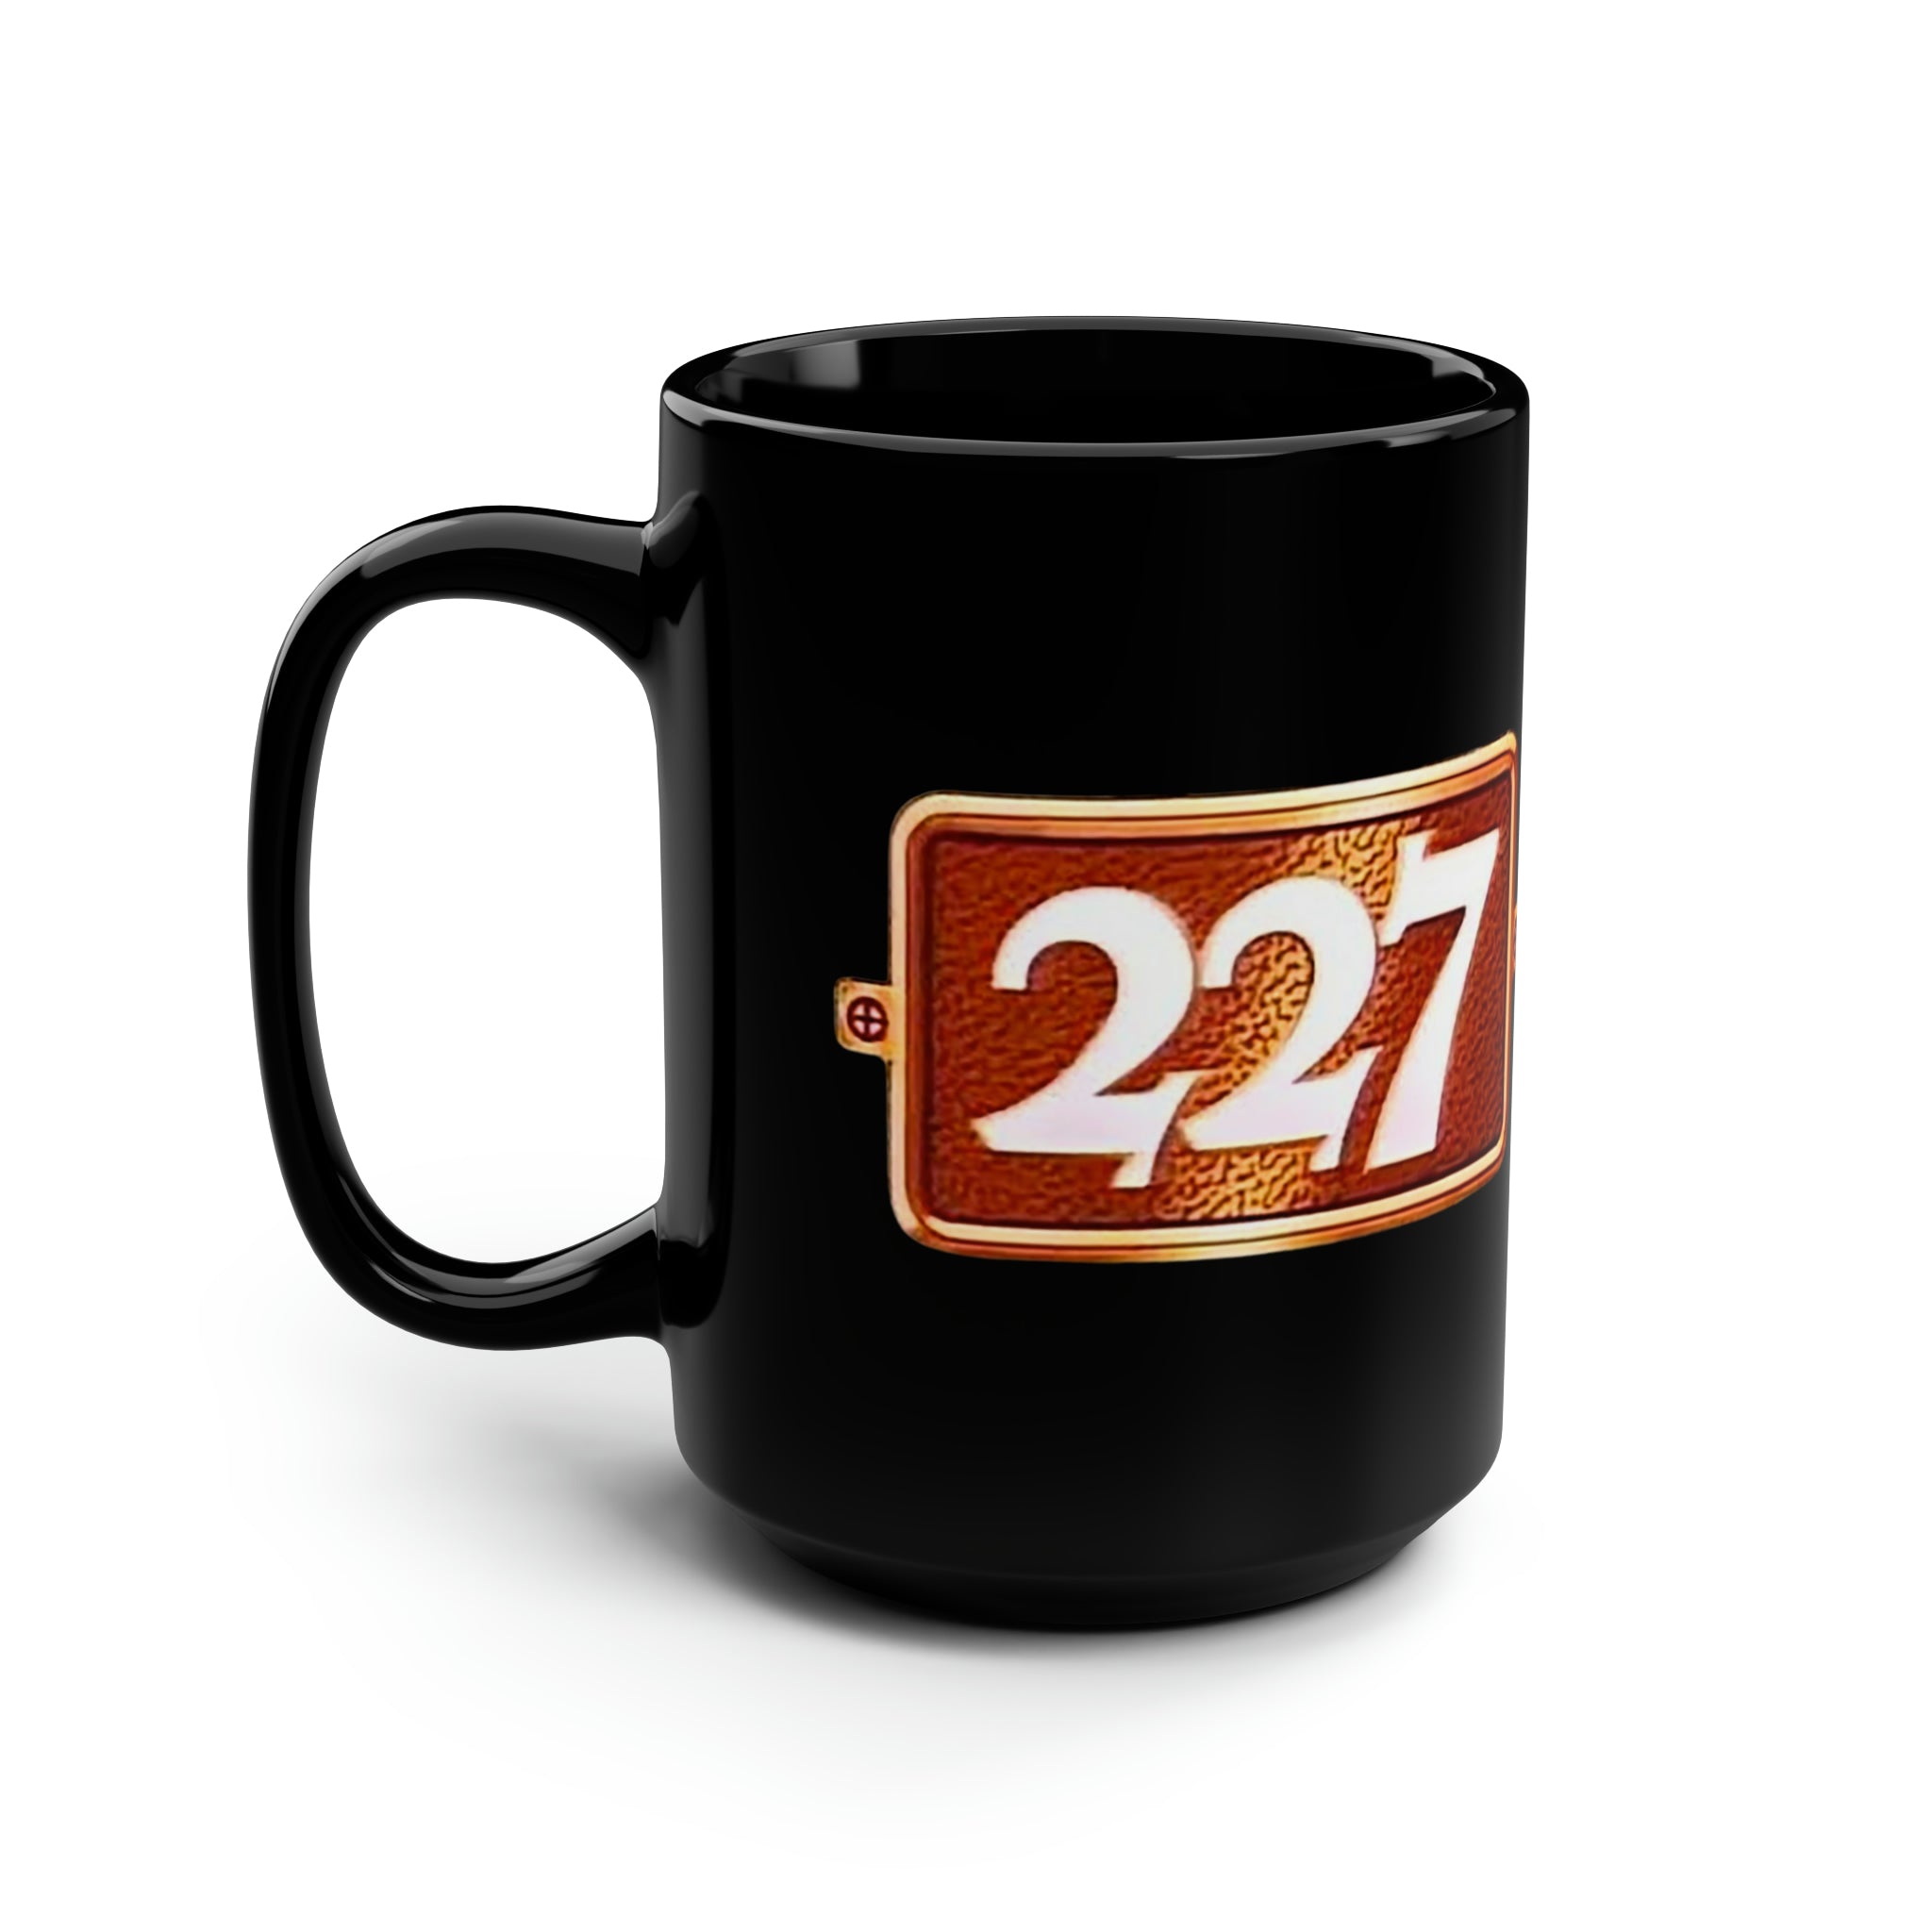 https://creationsbychrisandcarlos.store/products/227-tv-show-black-mug-15oz